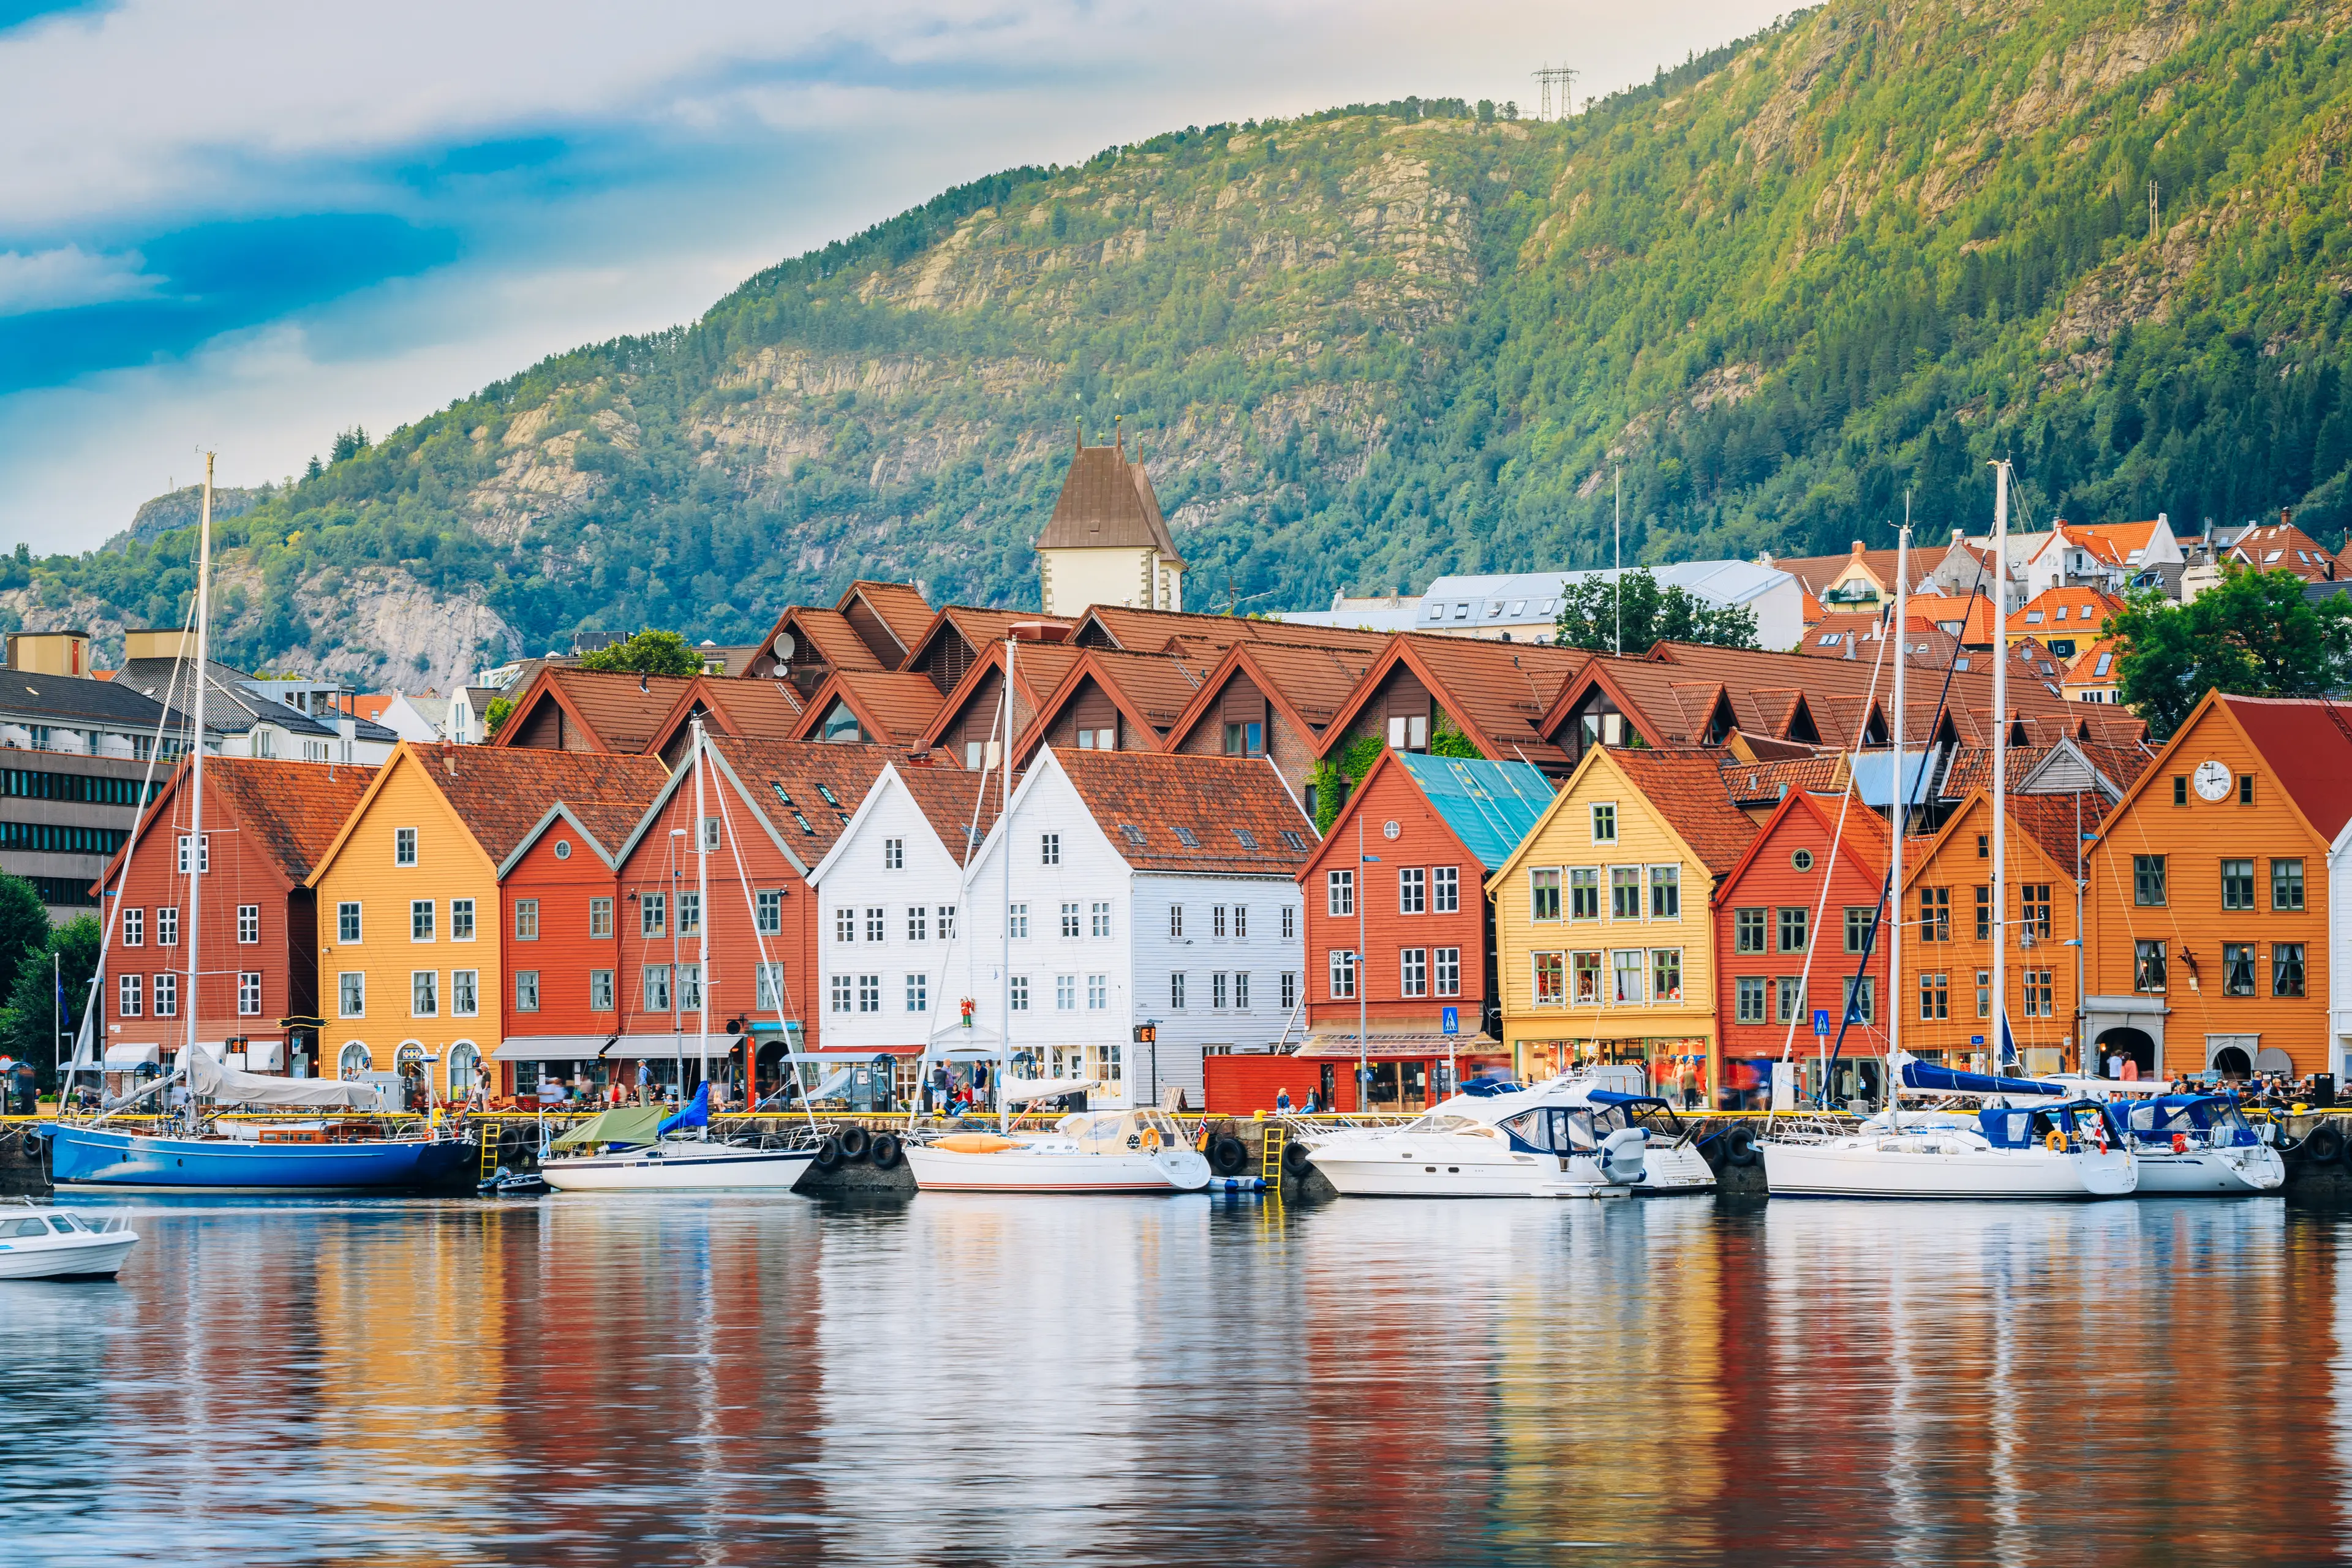 1-Day Solo Sightseeing and Outdoor Adventure for Locals in Norway